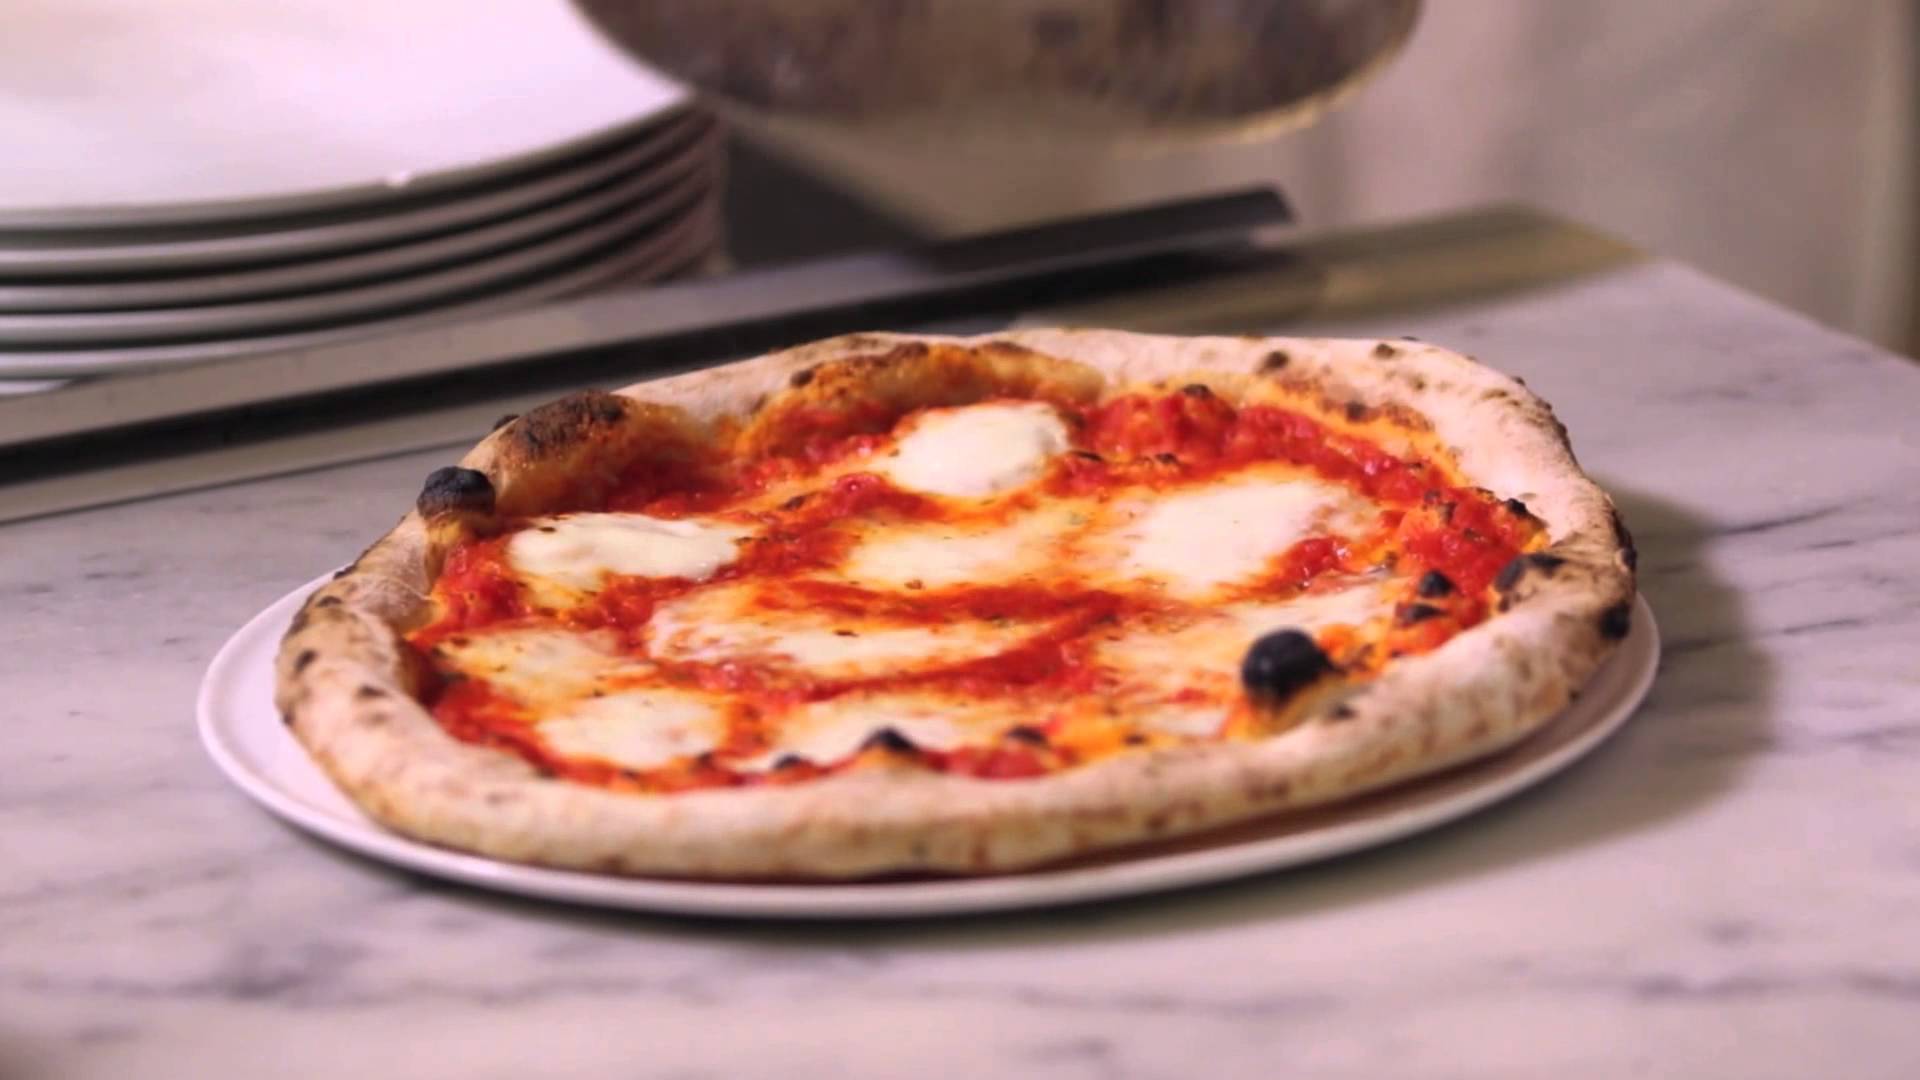 Happy National Pizza Day from the Little Italy Association!